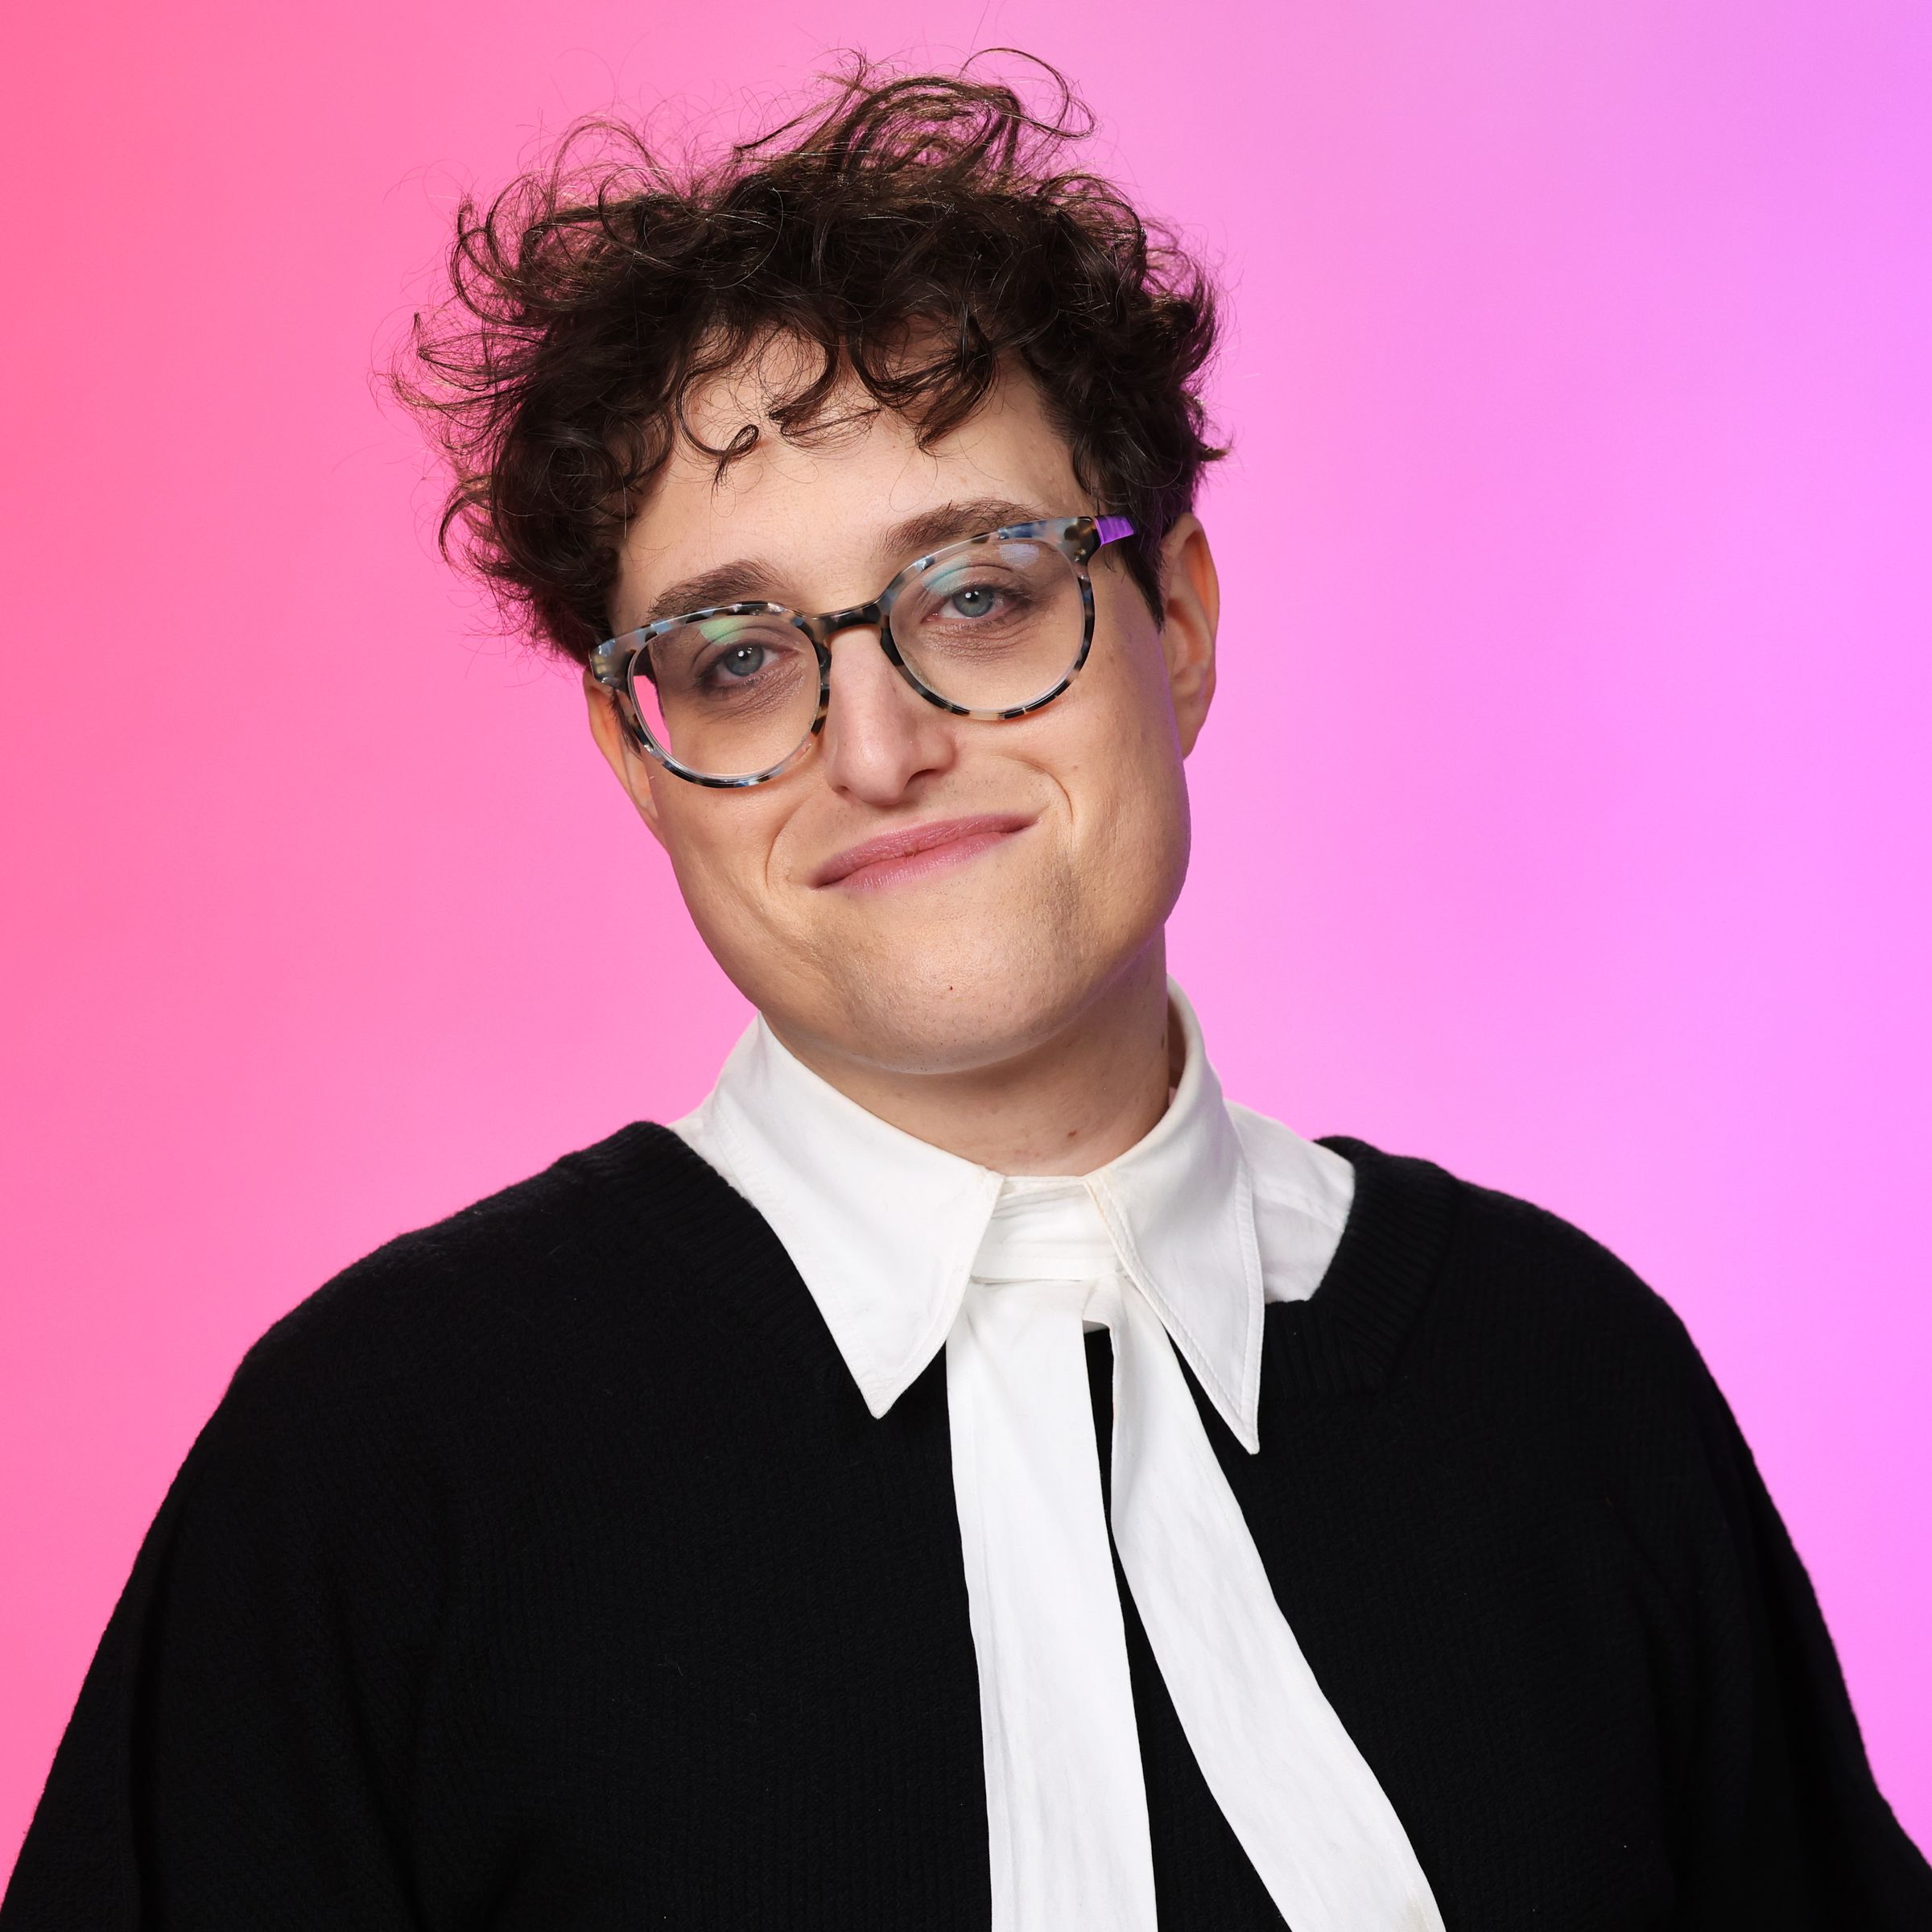 A close-up portrait shot of a nonbinary person wearing glasses, and a frock that resembles that of a court judge.